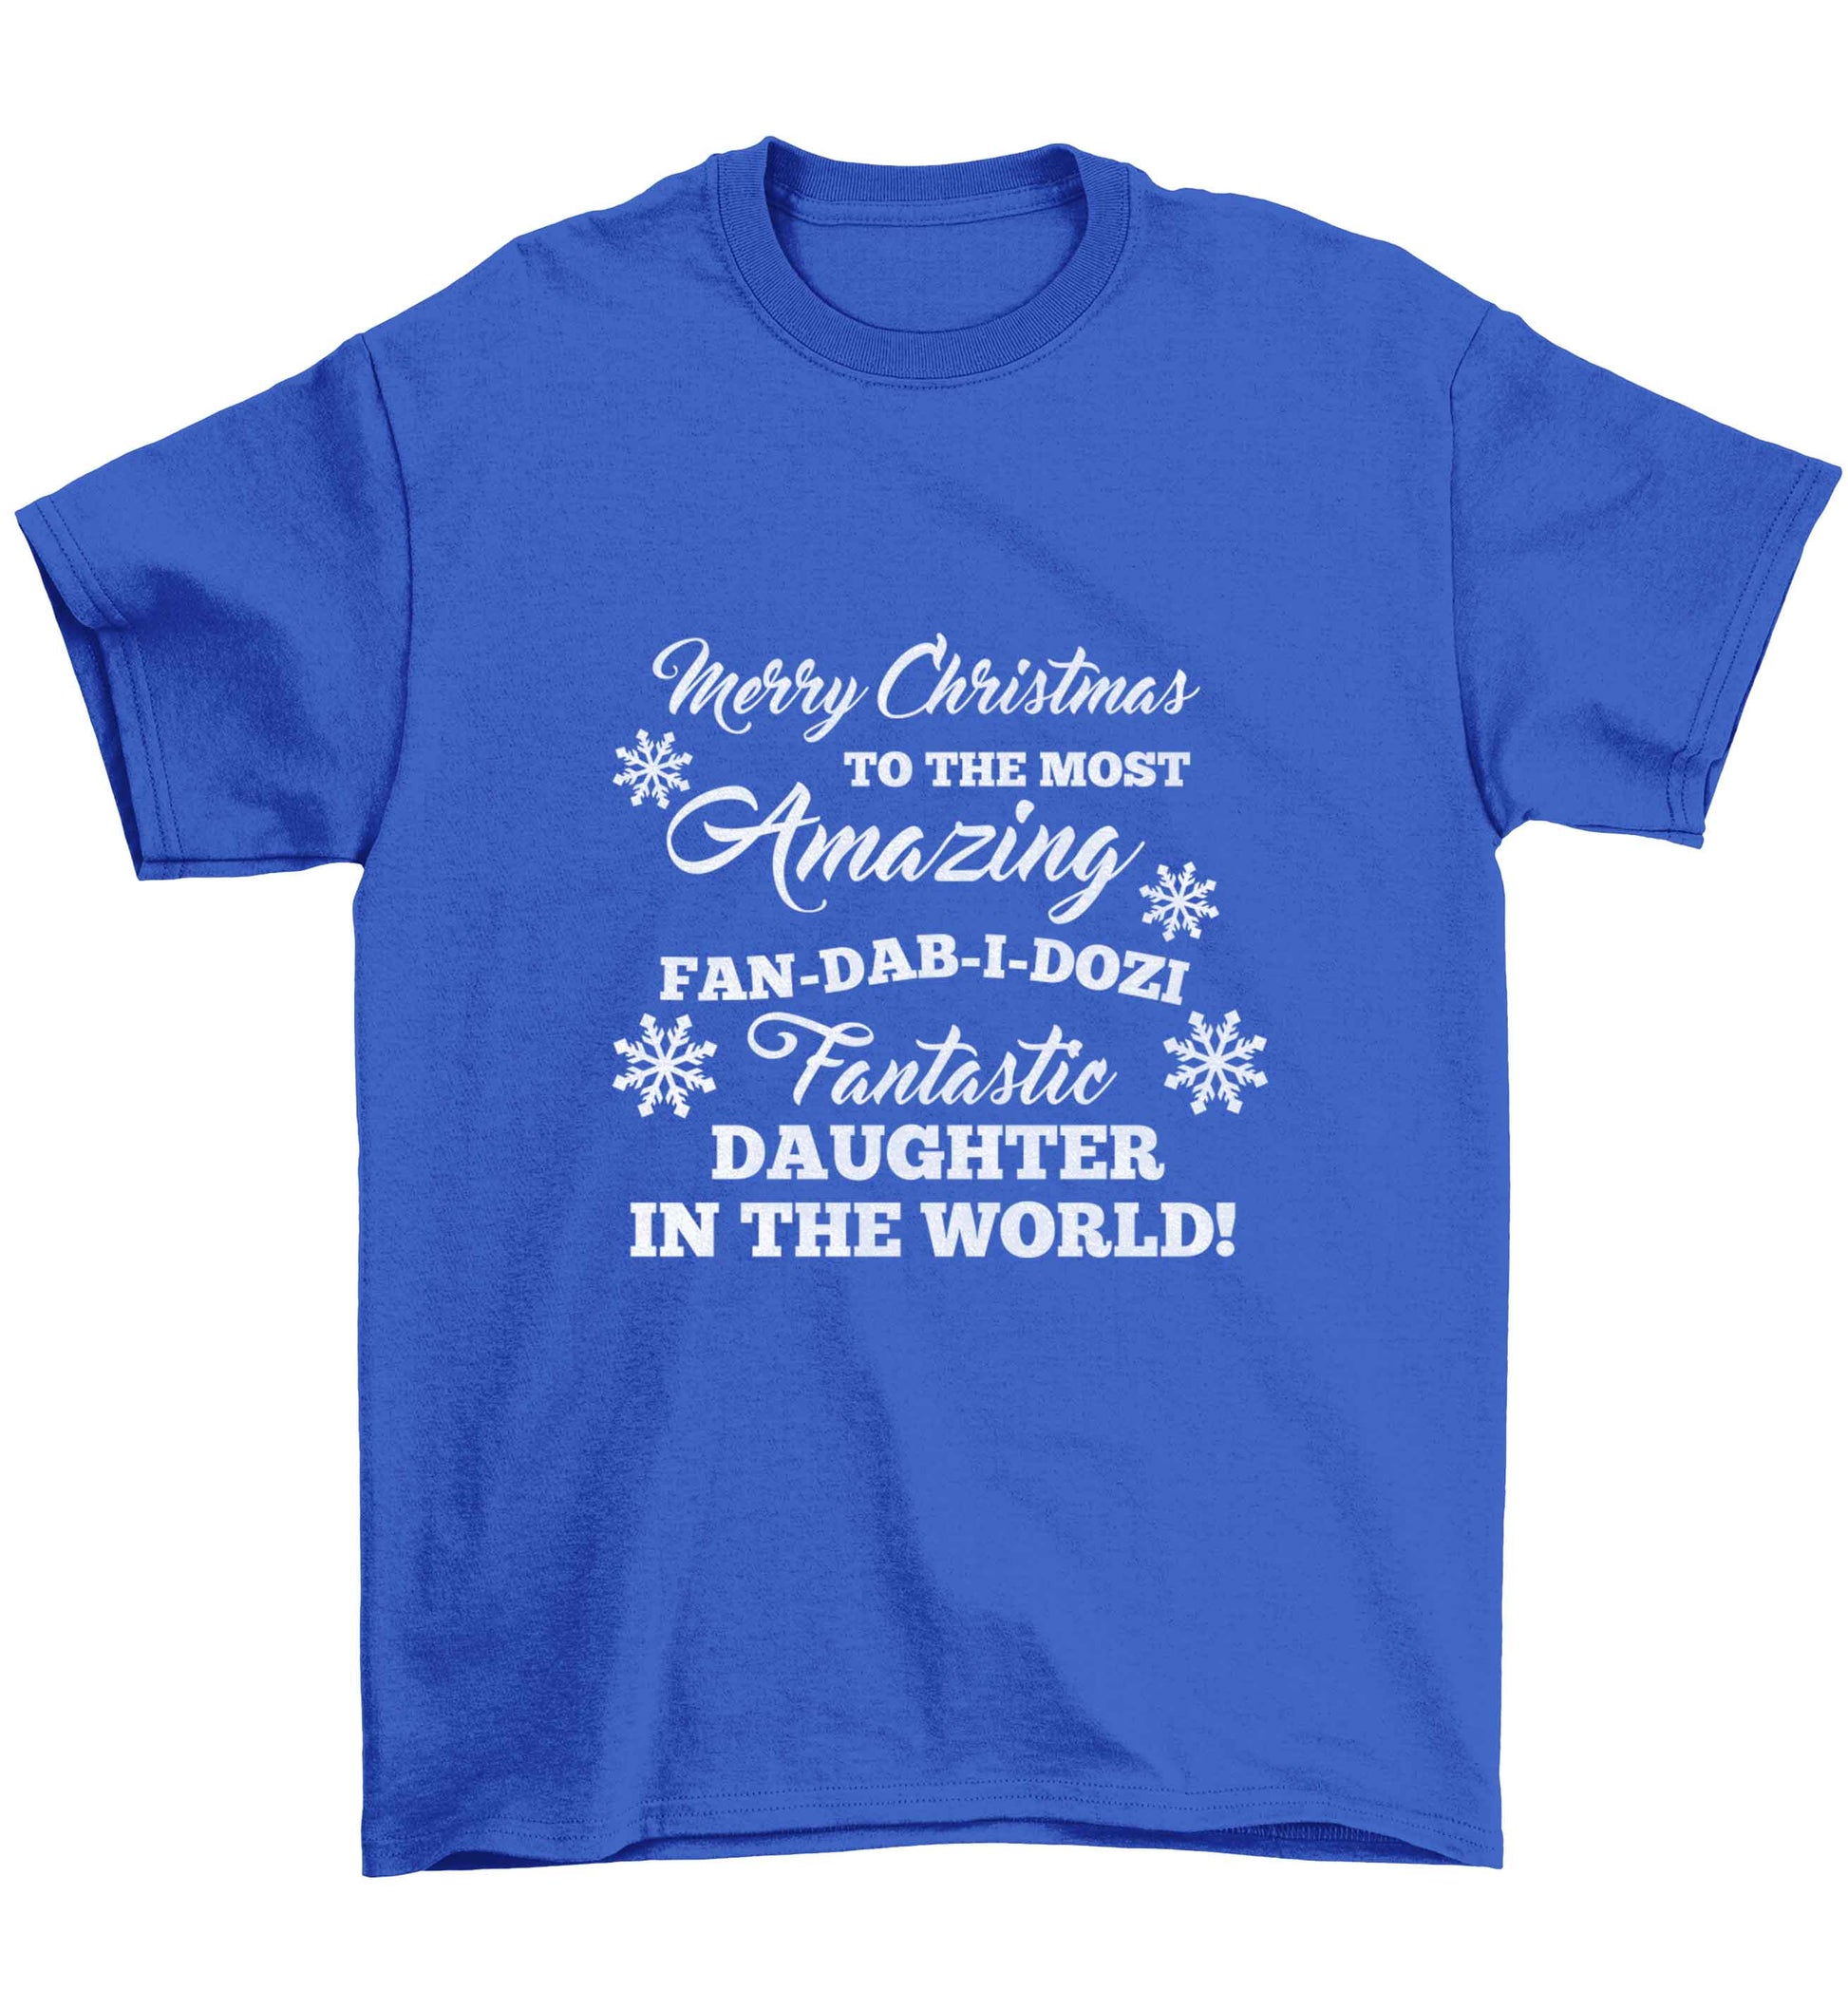 Merry Christmas to the most amazing fan-dab-i-dozi fantasic Daughter in the world Children's blue Tshirt 12-13 Years